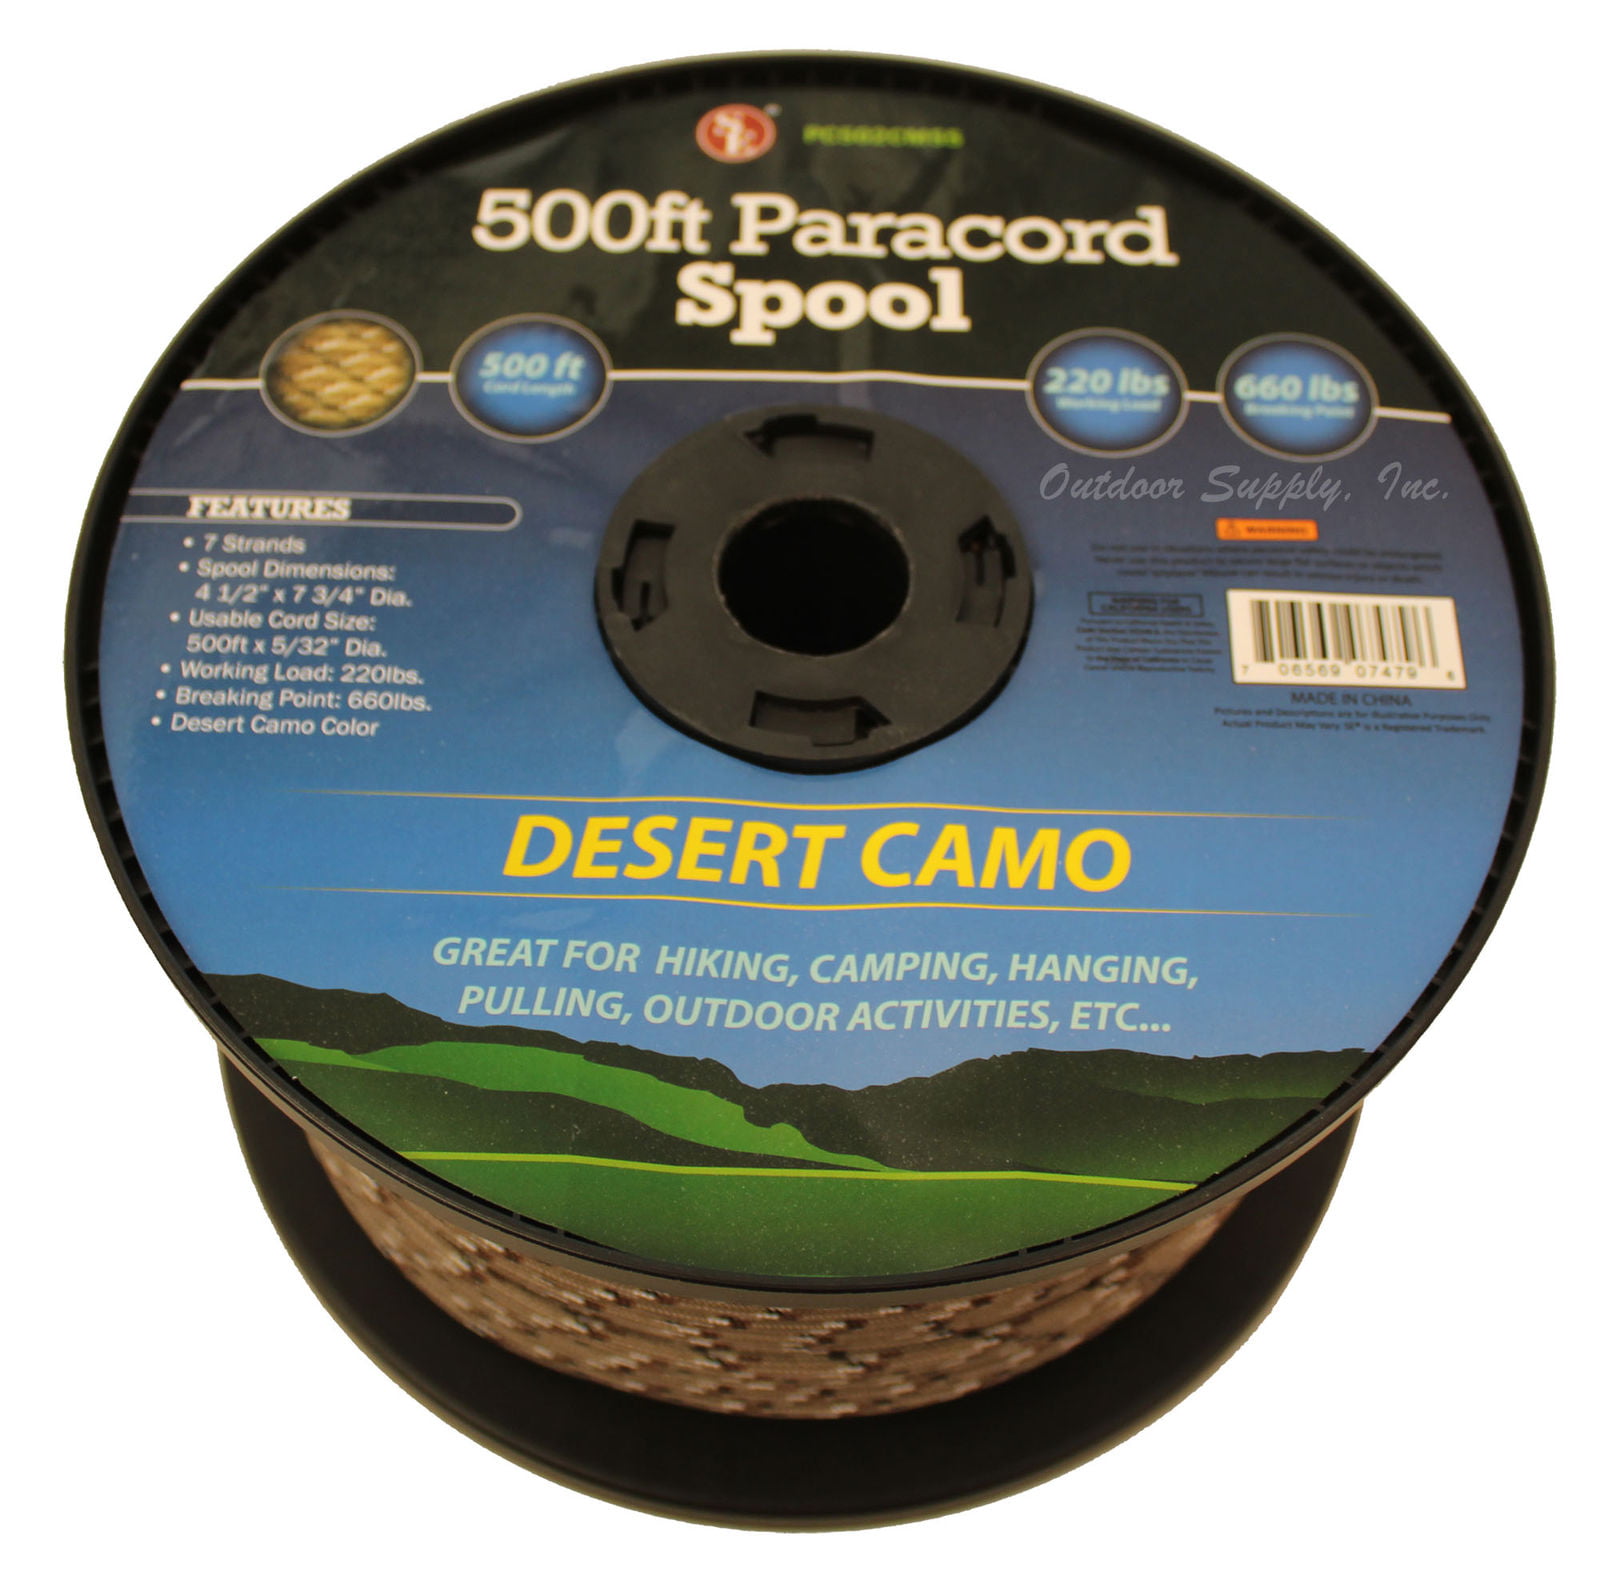 Lot of 9 Spools of 500' each Paracord 550 lb 7 Strand Camping Survival Bracelet 